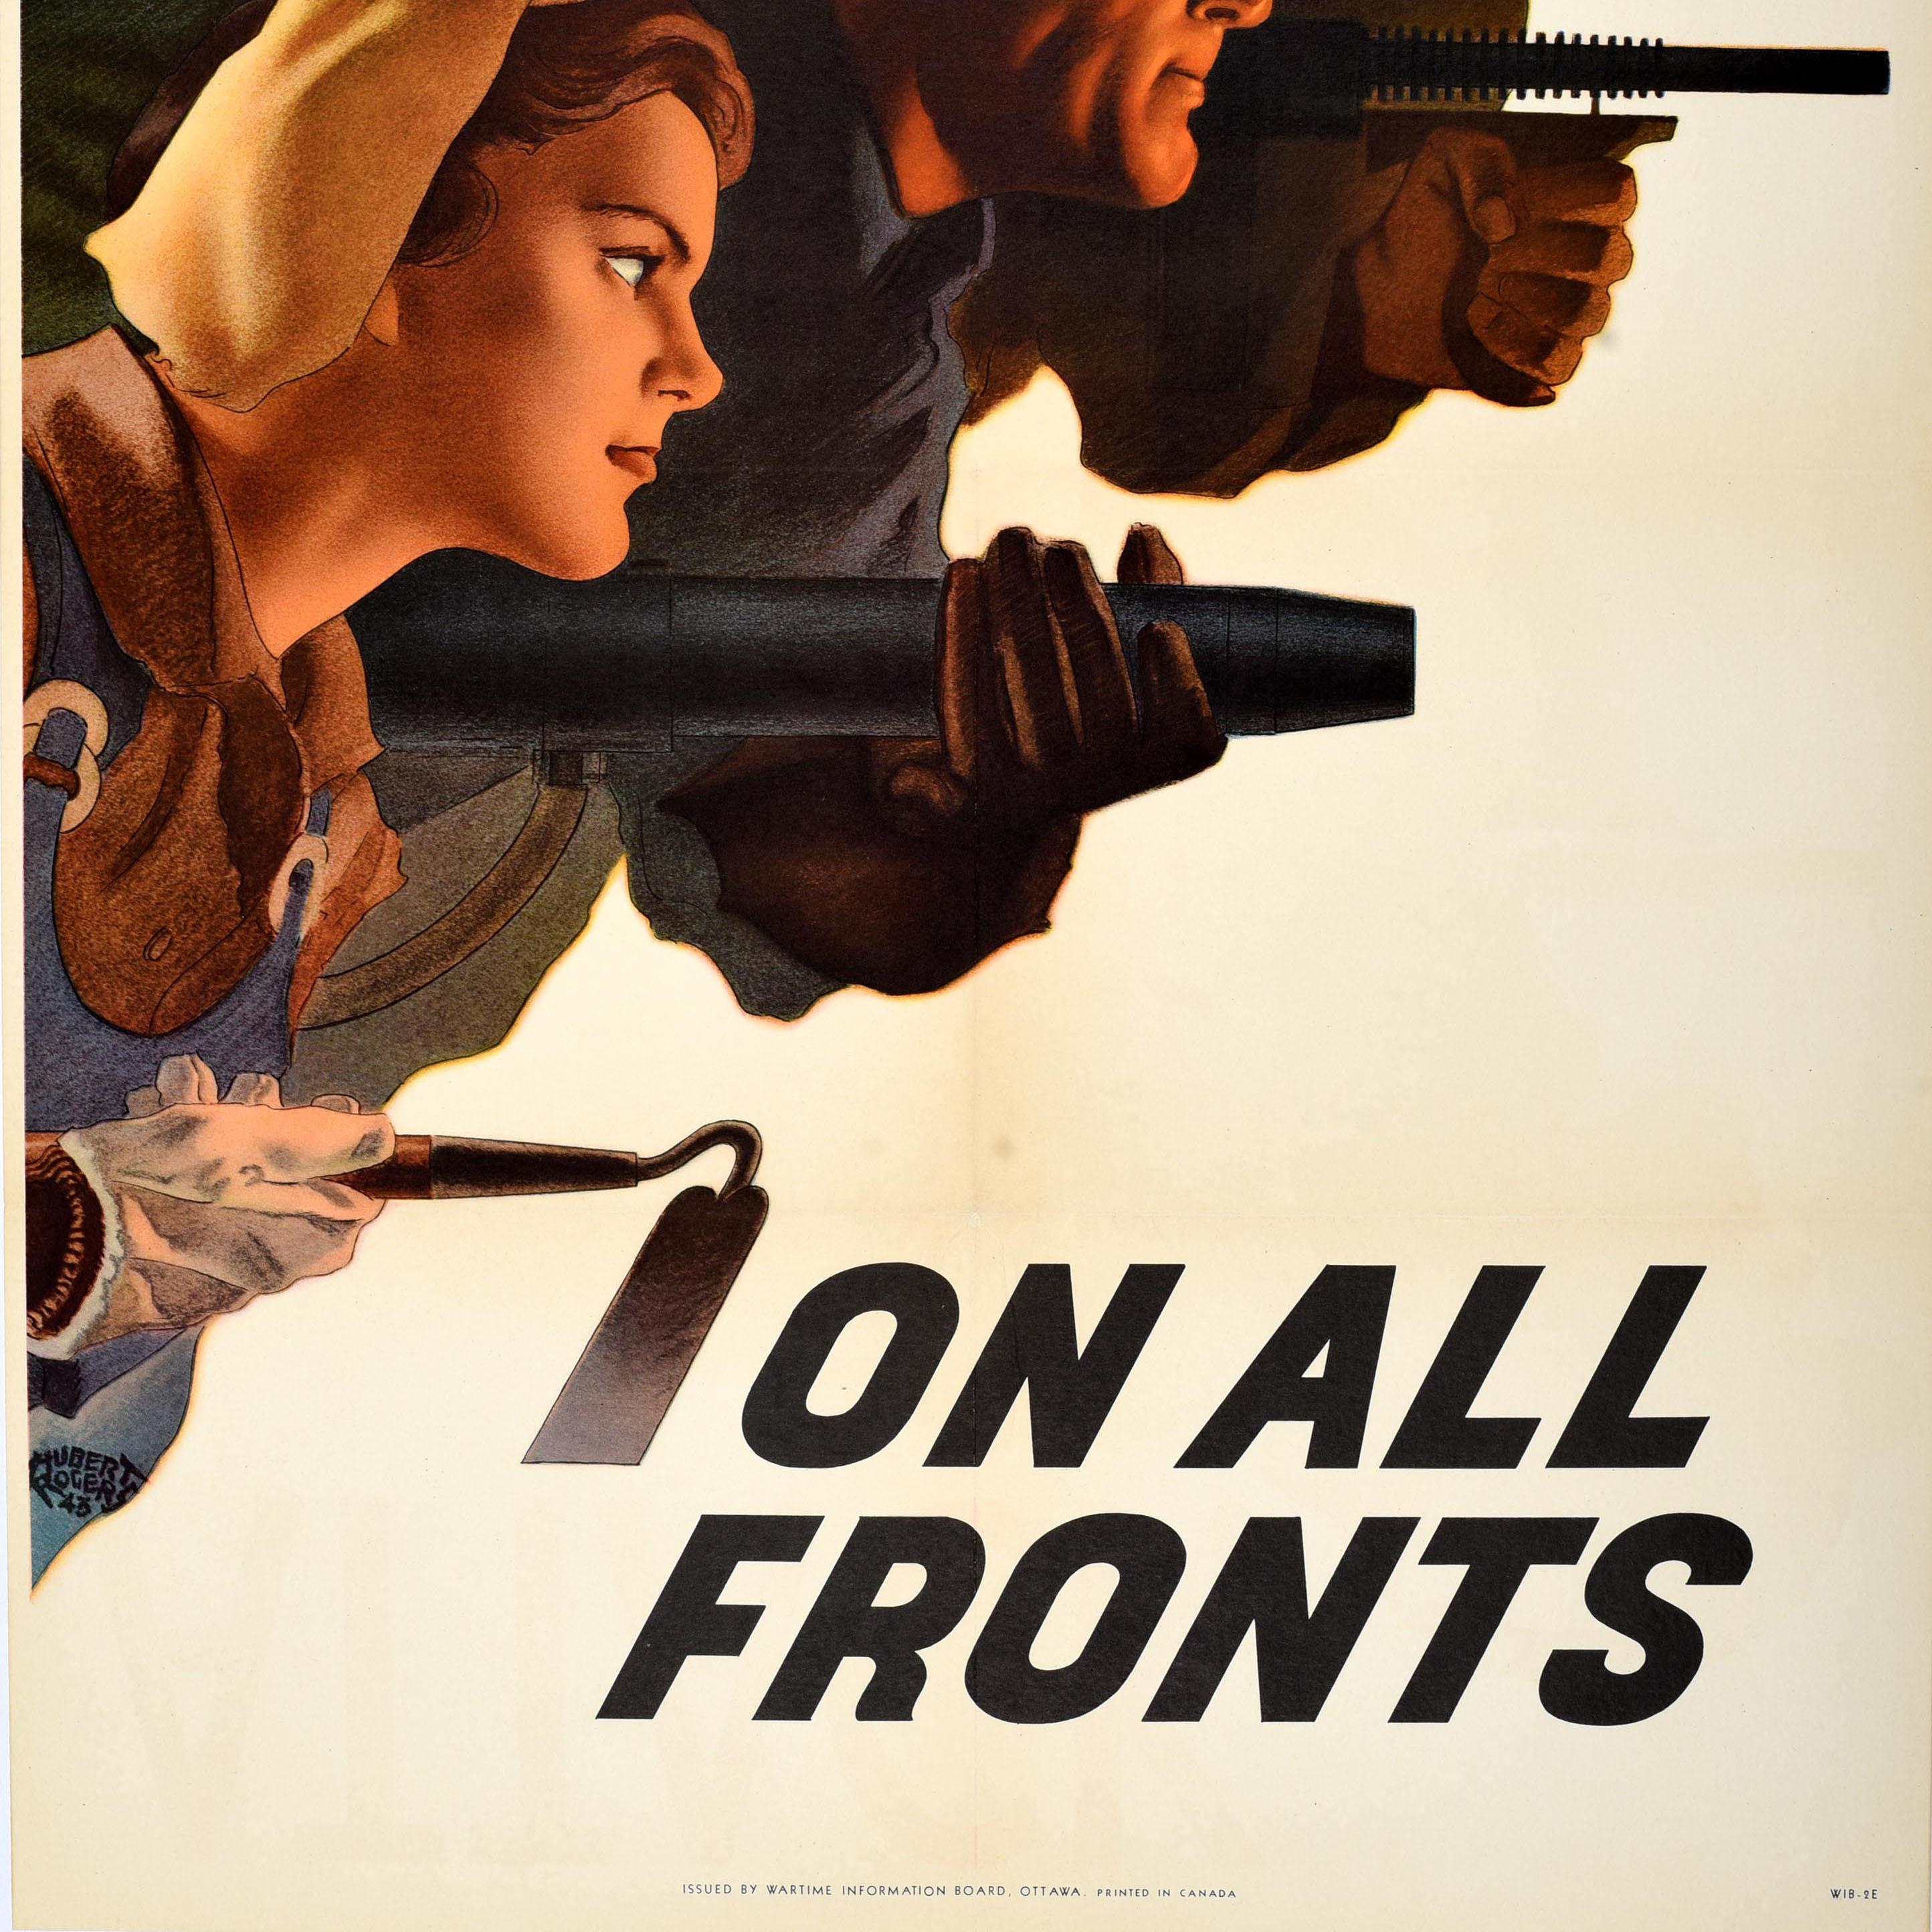 Original vintage World War Two poster - Attack On All Fronts - featuring a dynamic design by Hubert Rogers (1898-1982) depicting three people leaning forward side by side in a diagonal row, a soldier in military uniform and helmet holding a gun with